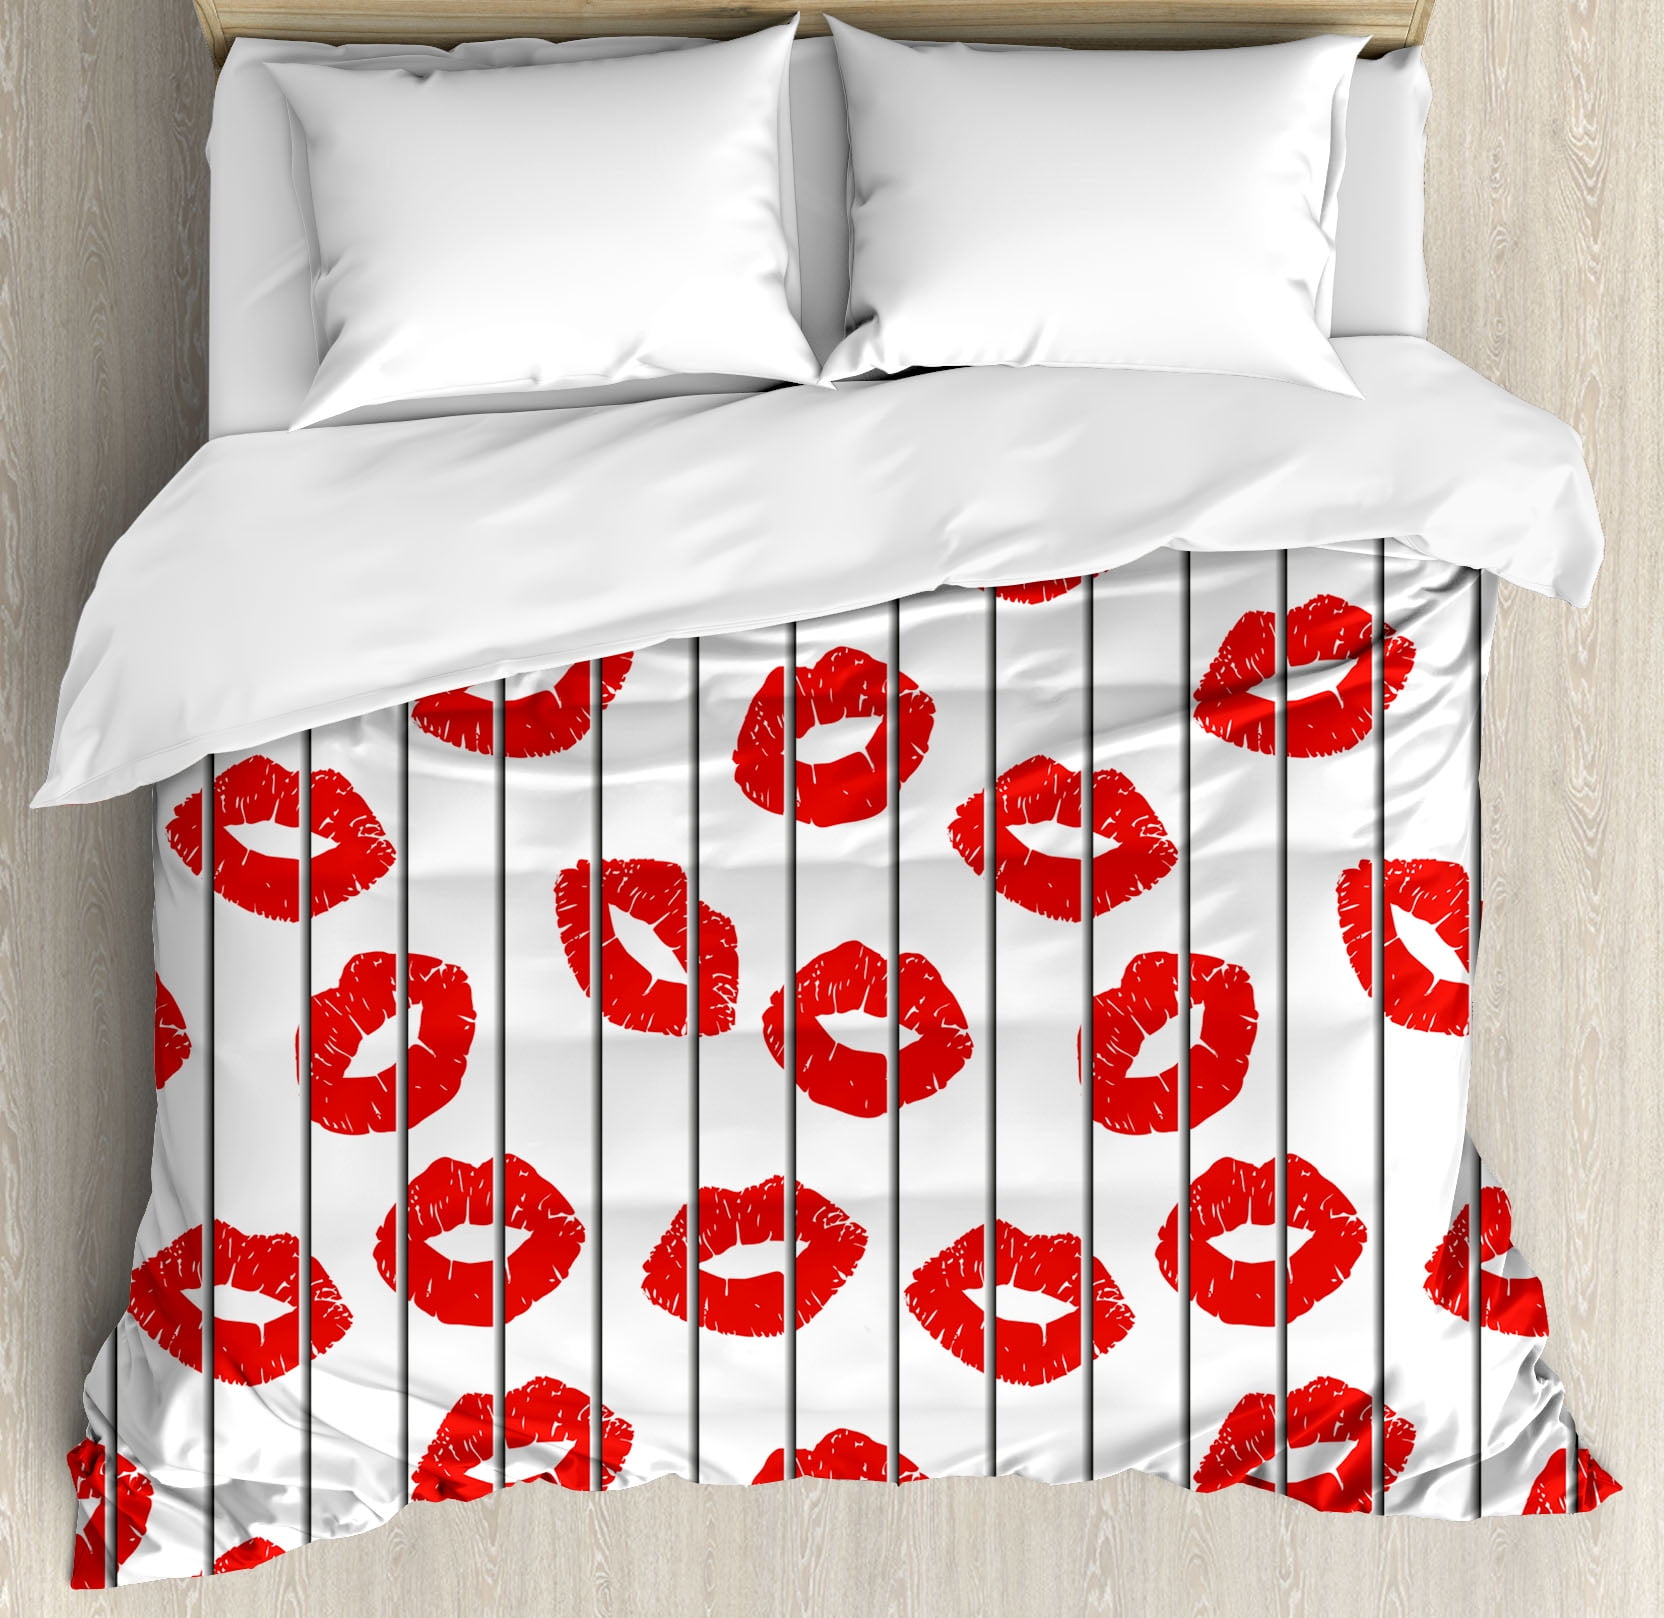 Glamour Queen Size Duvet Cover Set Trendy Sexy Woman Lips Behind The Bars Female Love Romance